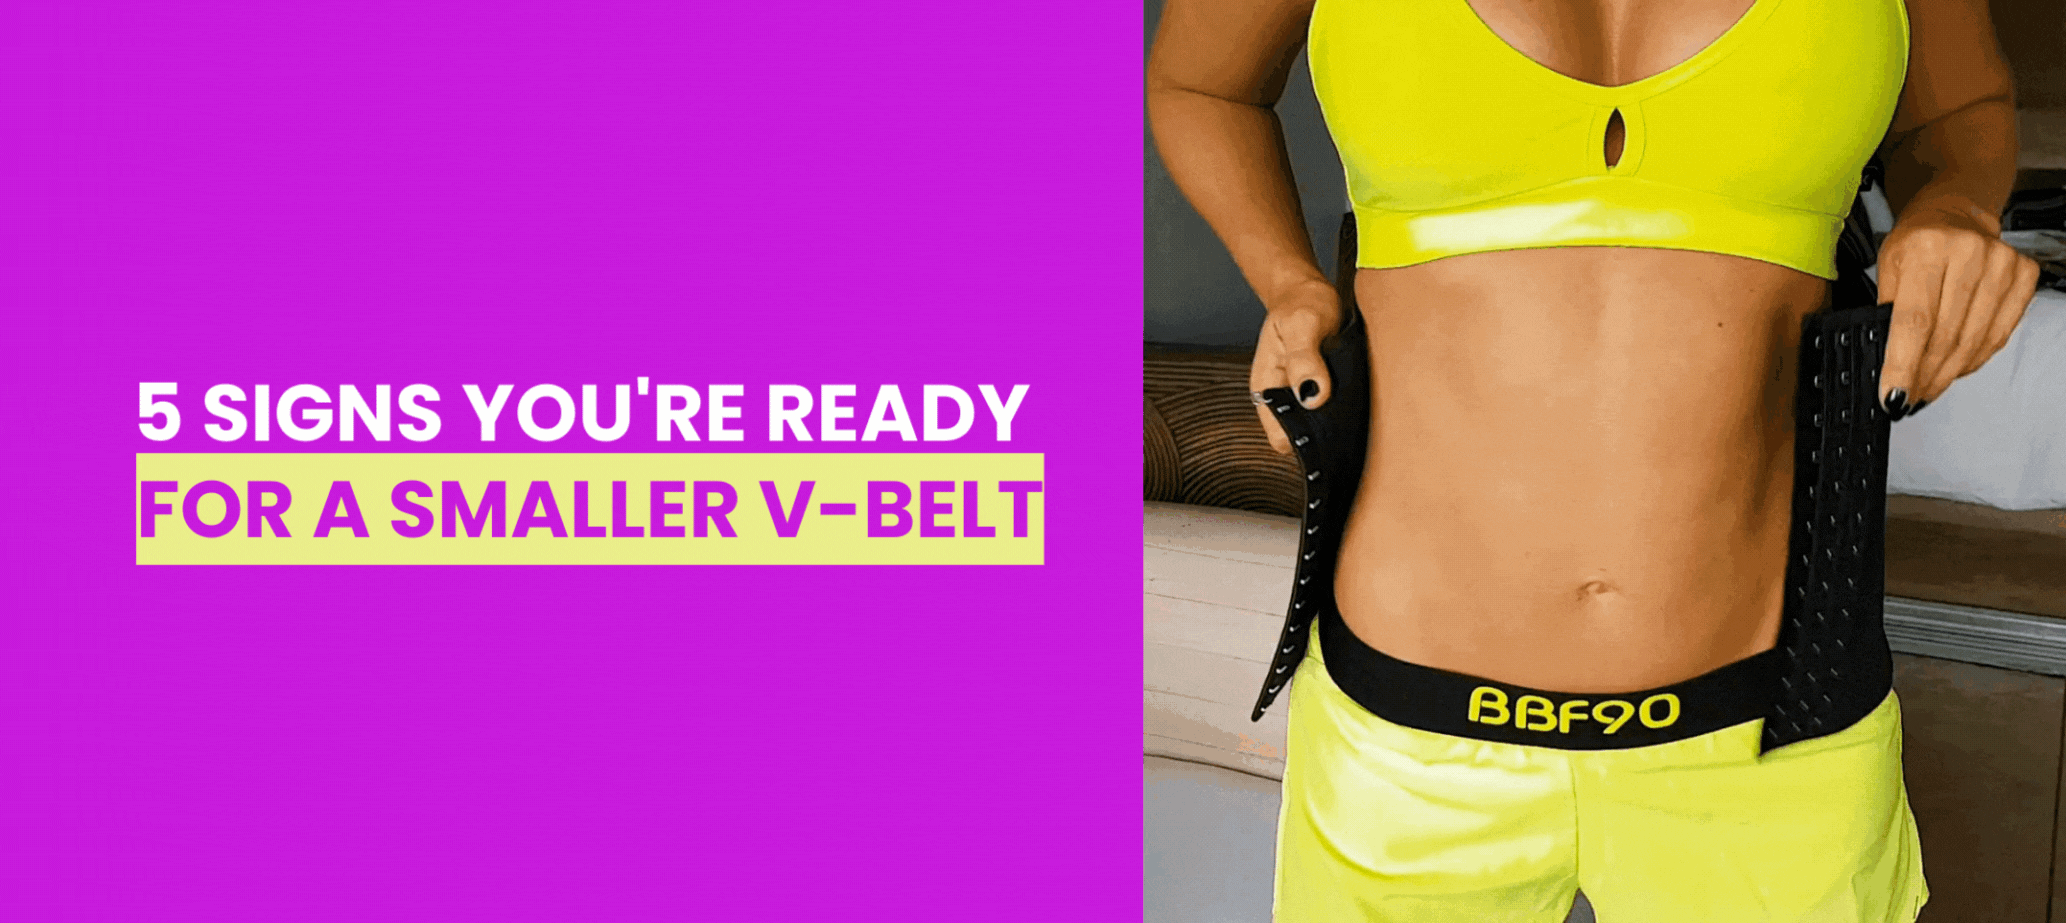 5 Signs You're Ready for a Smaller V-Belt